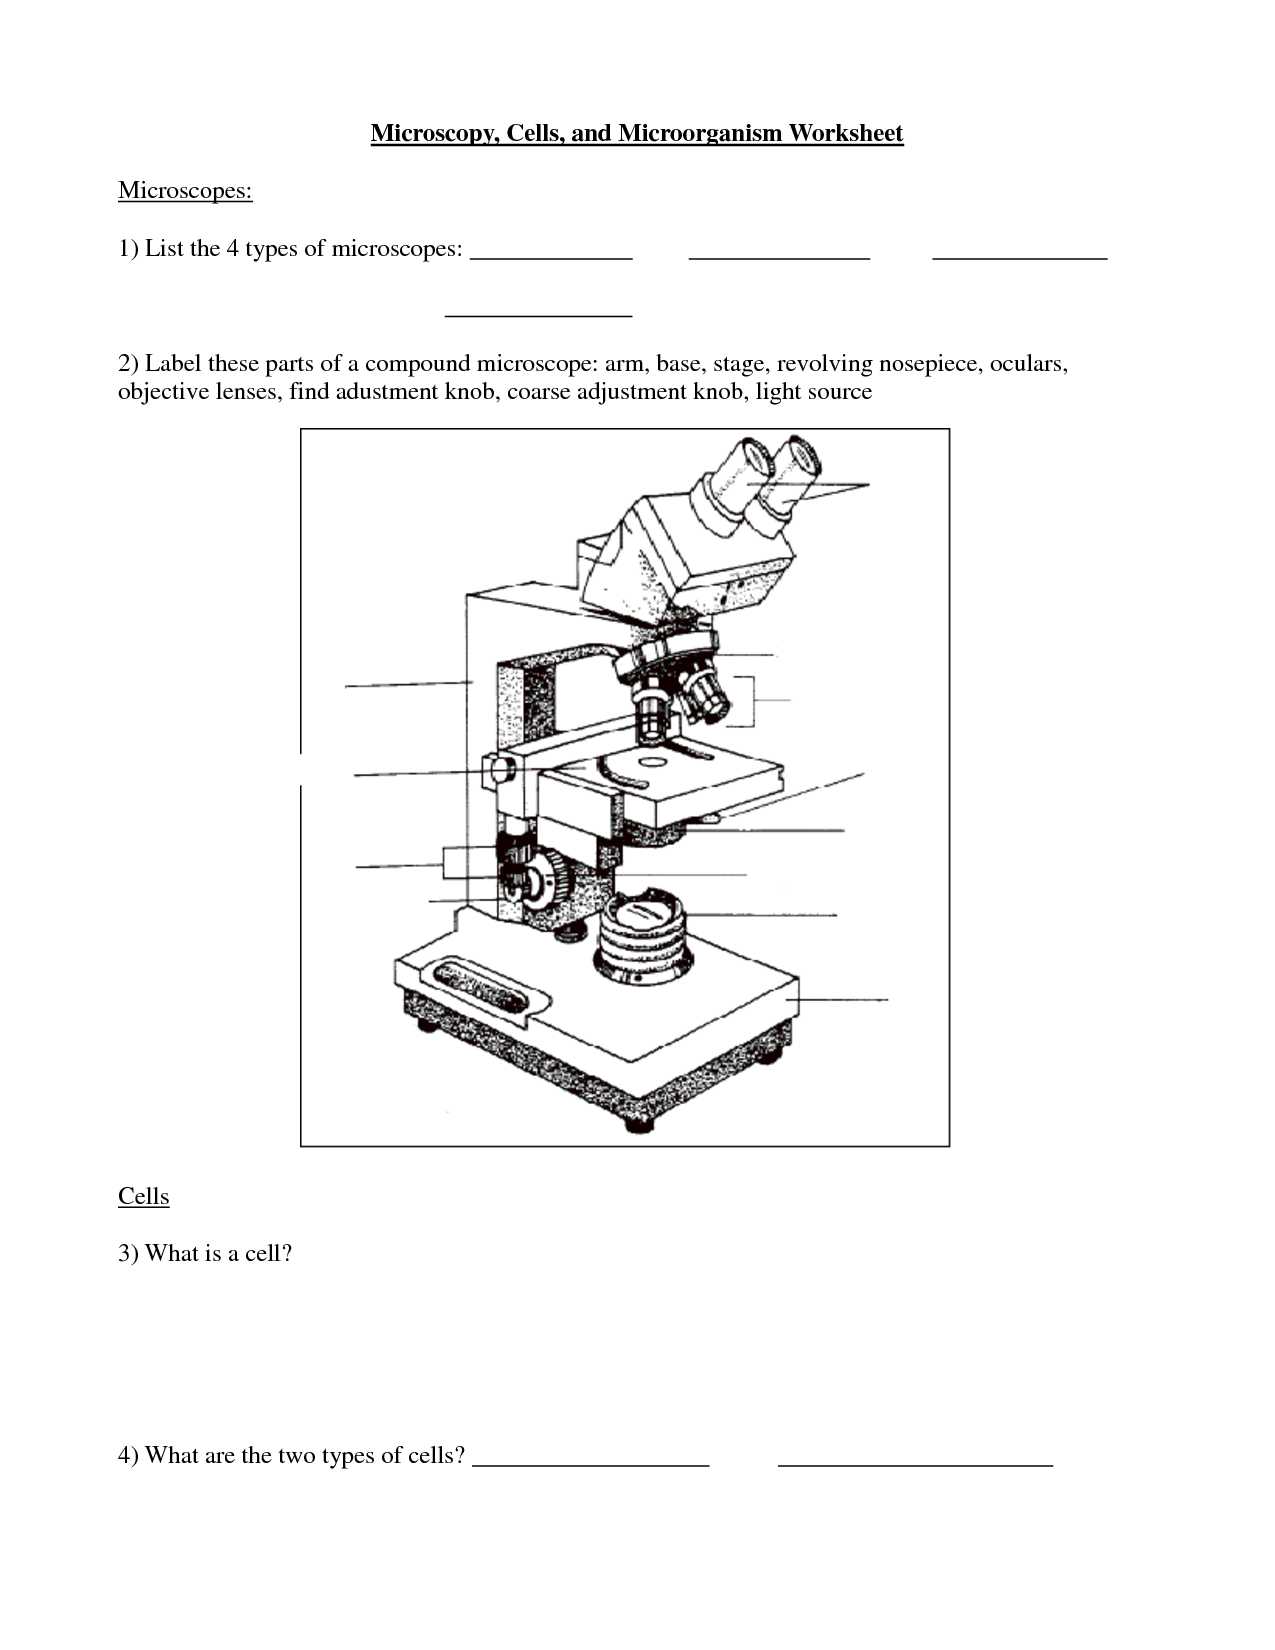 Parts Of A Microscope Worksheet Answers and Microscope to Label Worksheets Printable Worksheets Dinocrofo